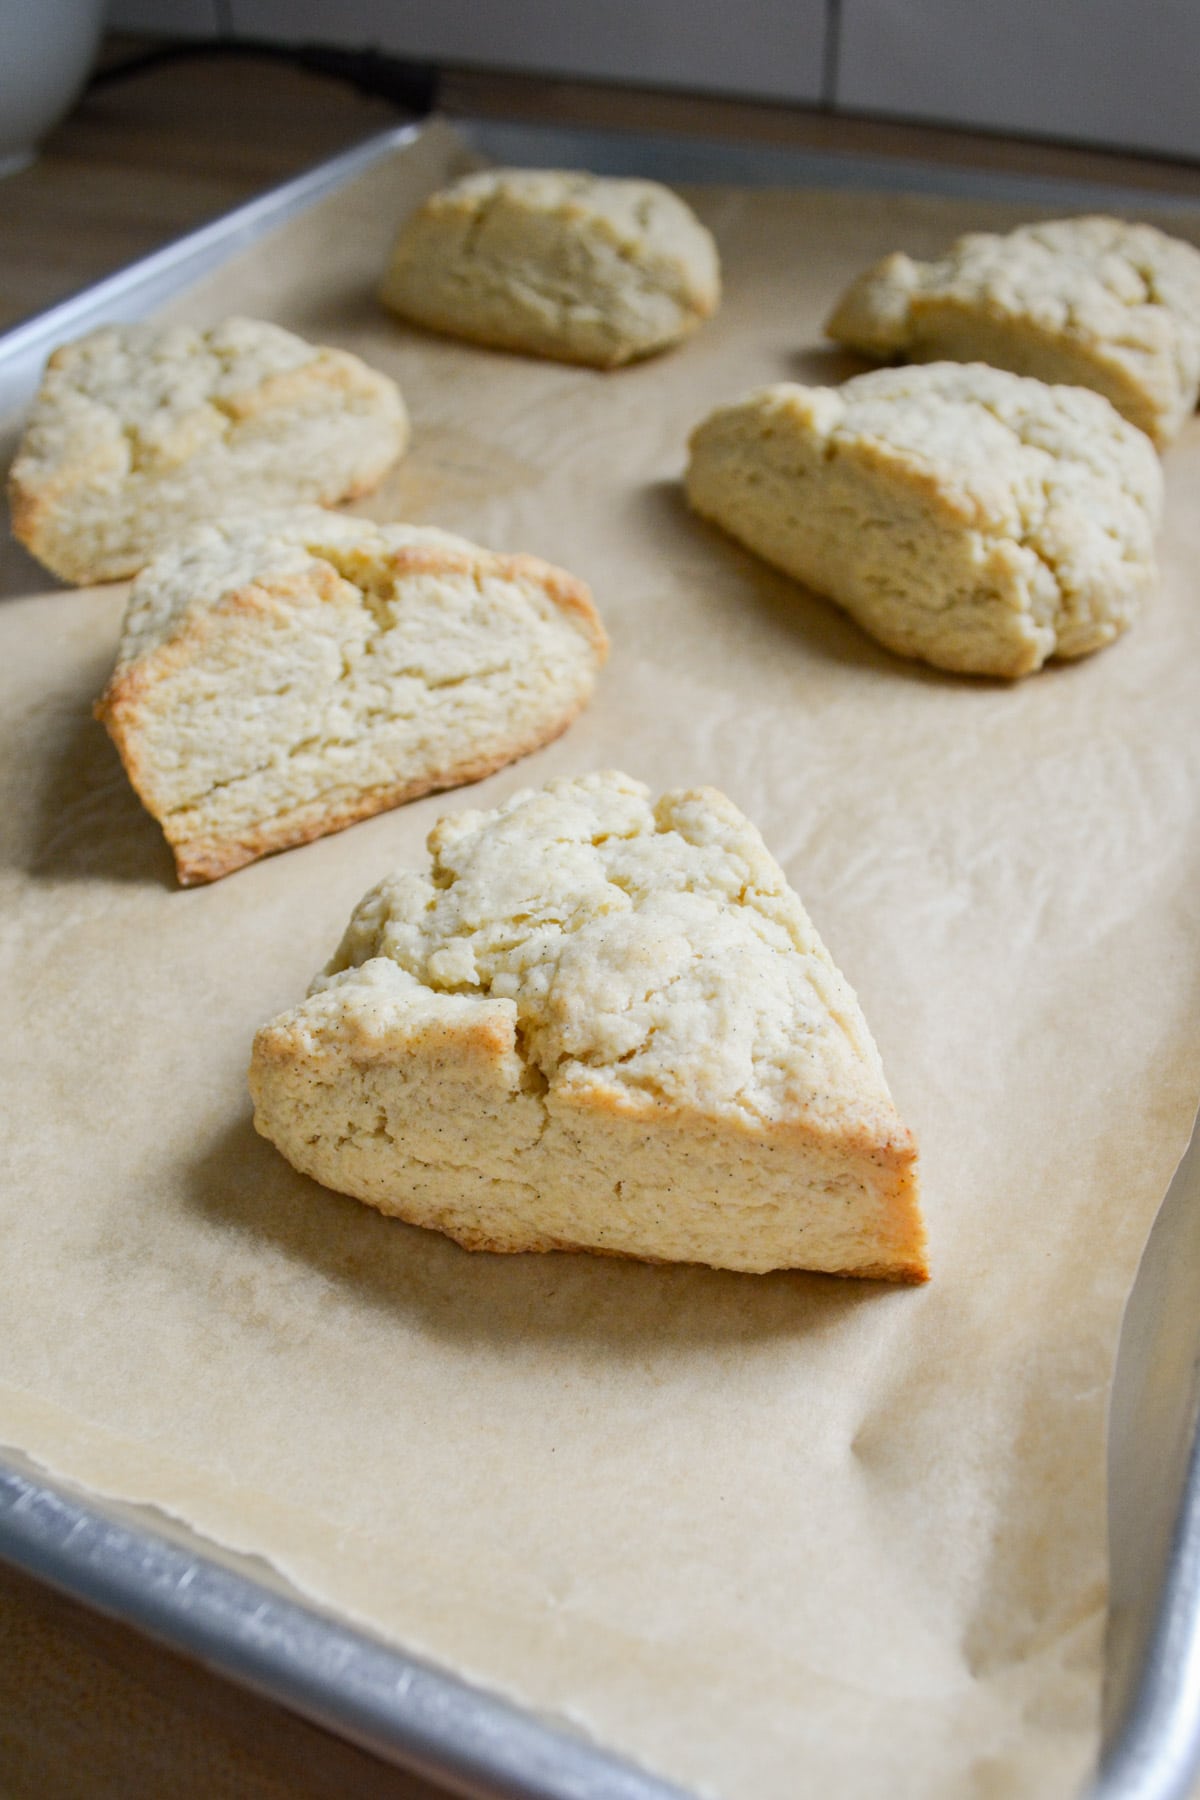 Baked vegan vanilla bean scones on a baking sheet ready to be topped with glaze.